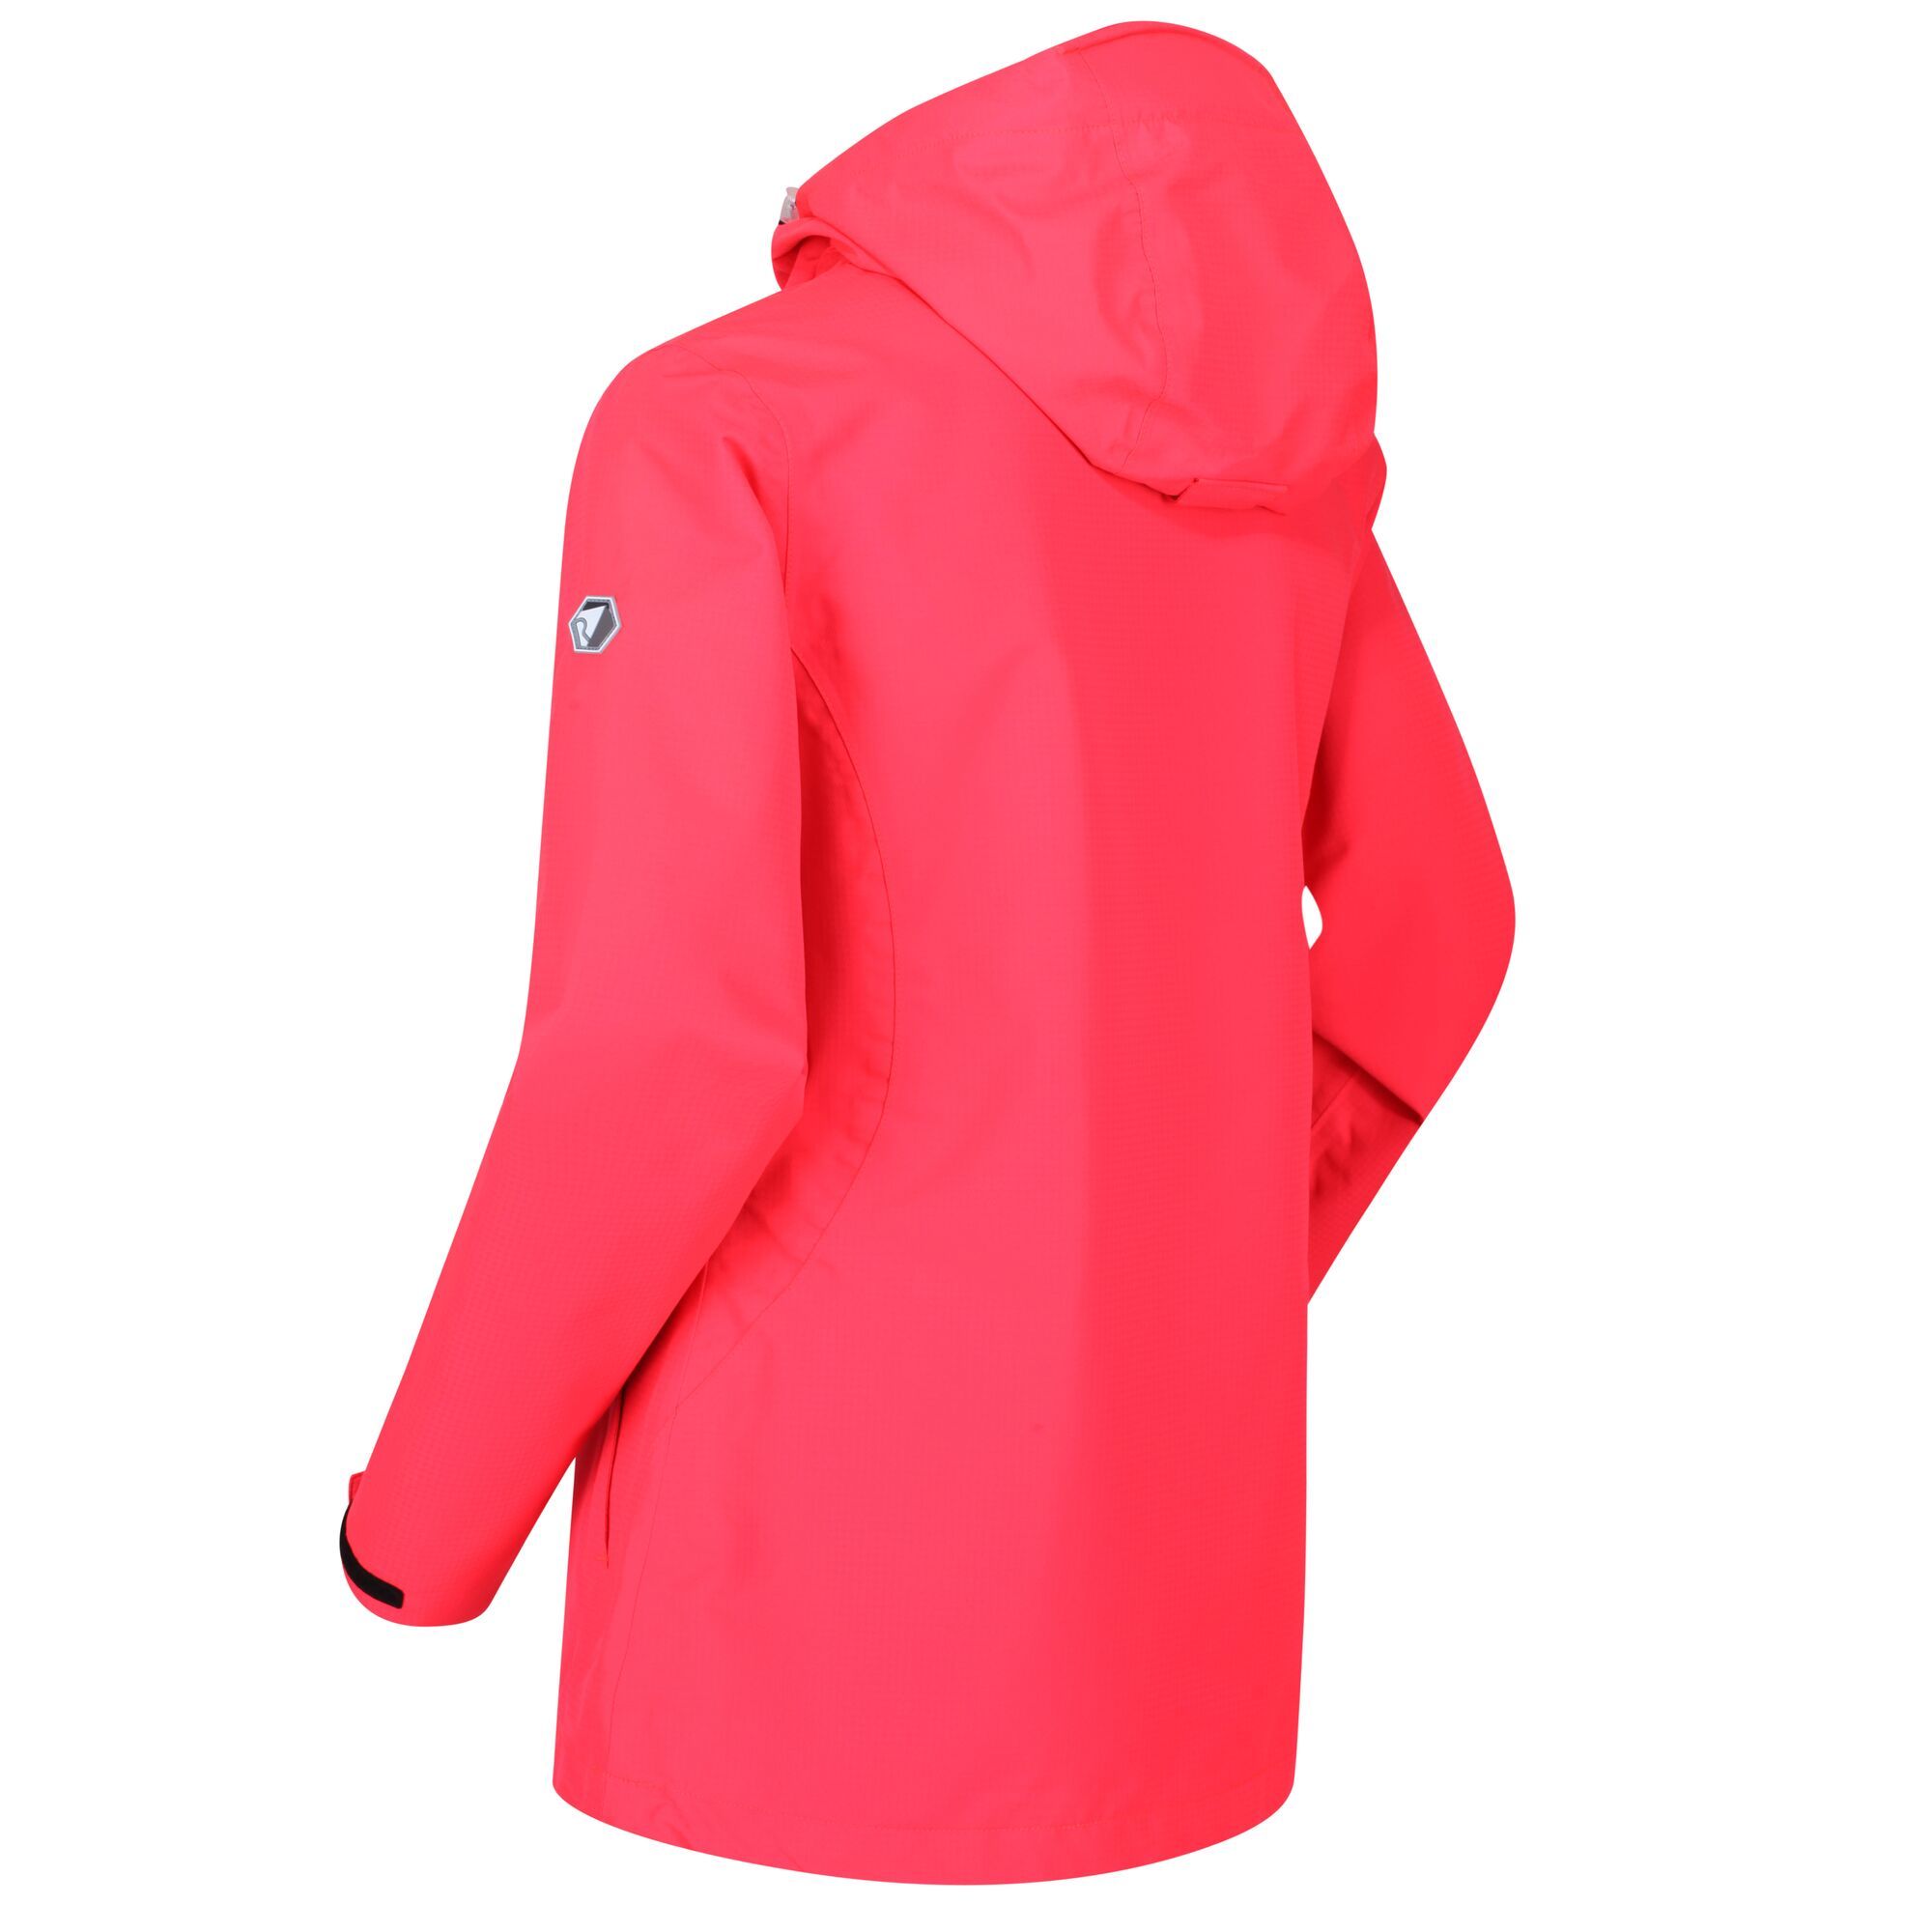 100% Polyester. Weatherproof hooded jacket made from breathable Isotex 5000. DWR water resistant finish. Attached adjustable technical hood. Internal zipped security pocket. 2 zipped pockets. Ideal for wet weather. Hand wash.